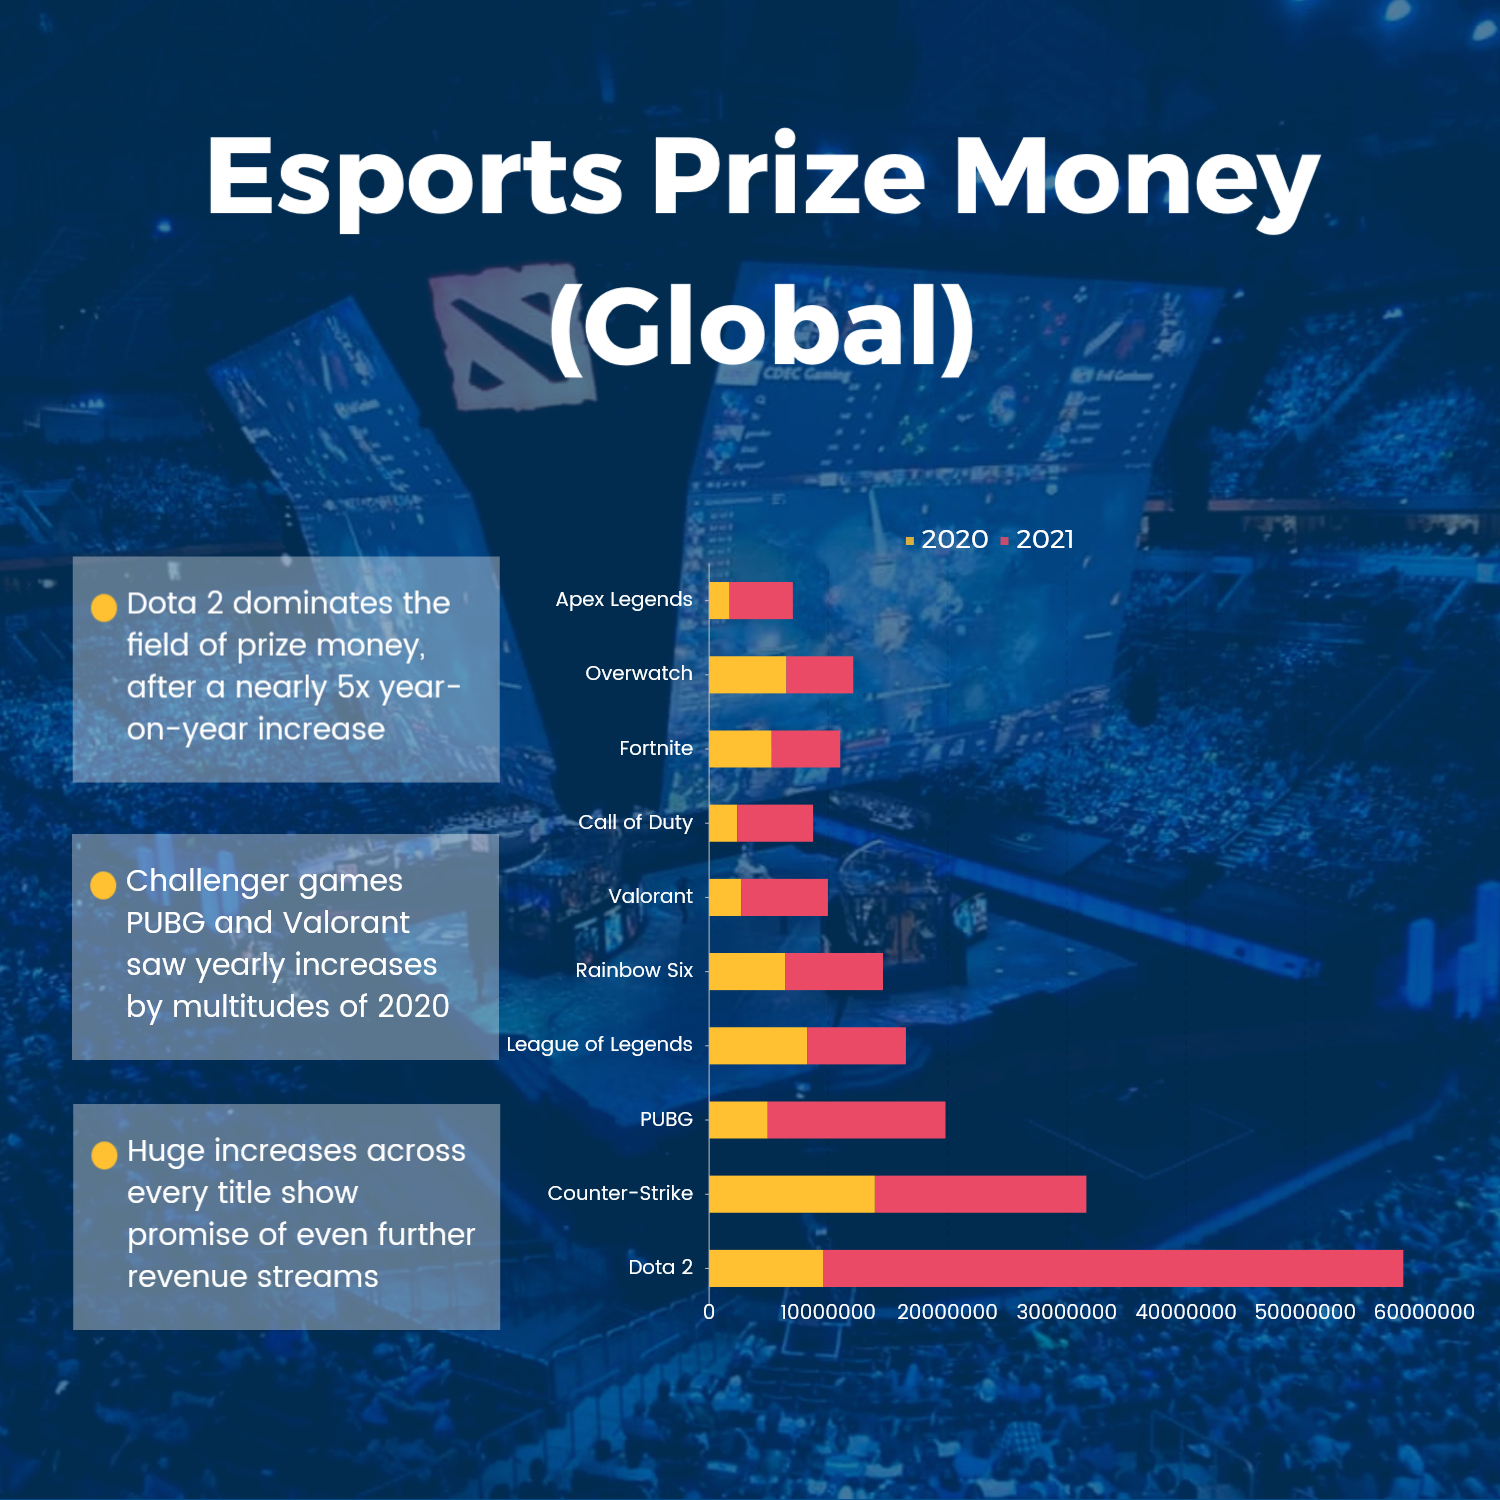 Dota esports prize money is by far the largest pool in esports. Credit: Rix.Digital